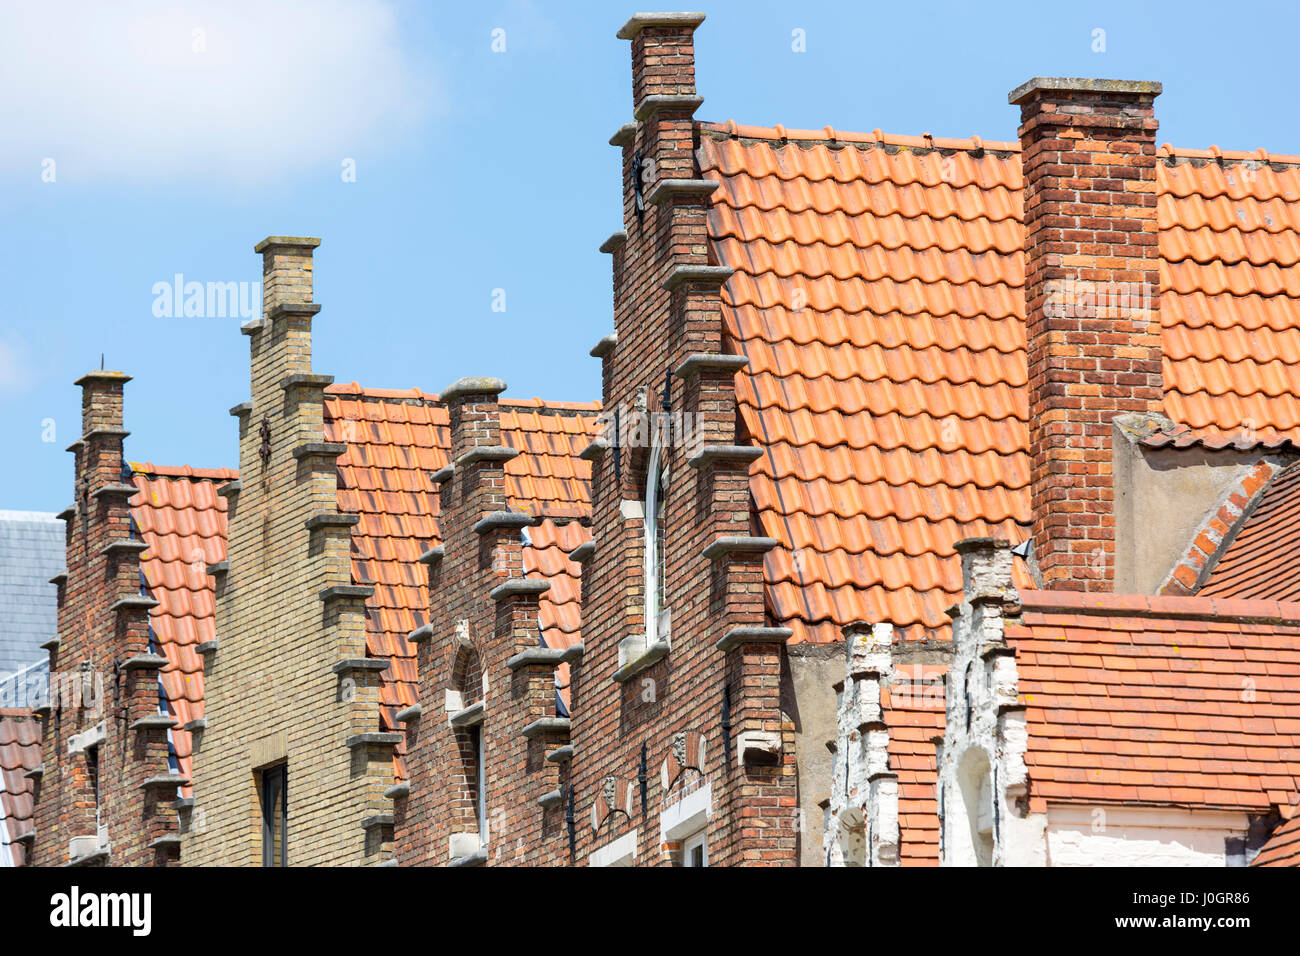 Traditional Belgian architecture crow-stepped gable ( crow steps) and terracotta roof tiles in Bruges - Brugge - Belgium Stock Photo